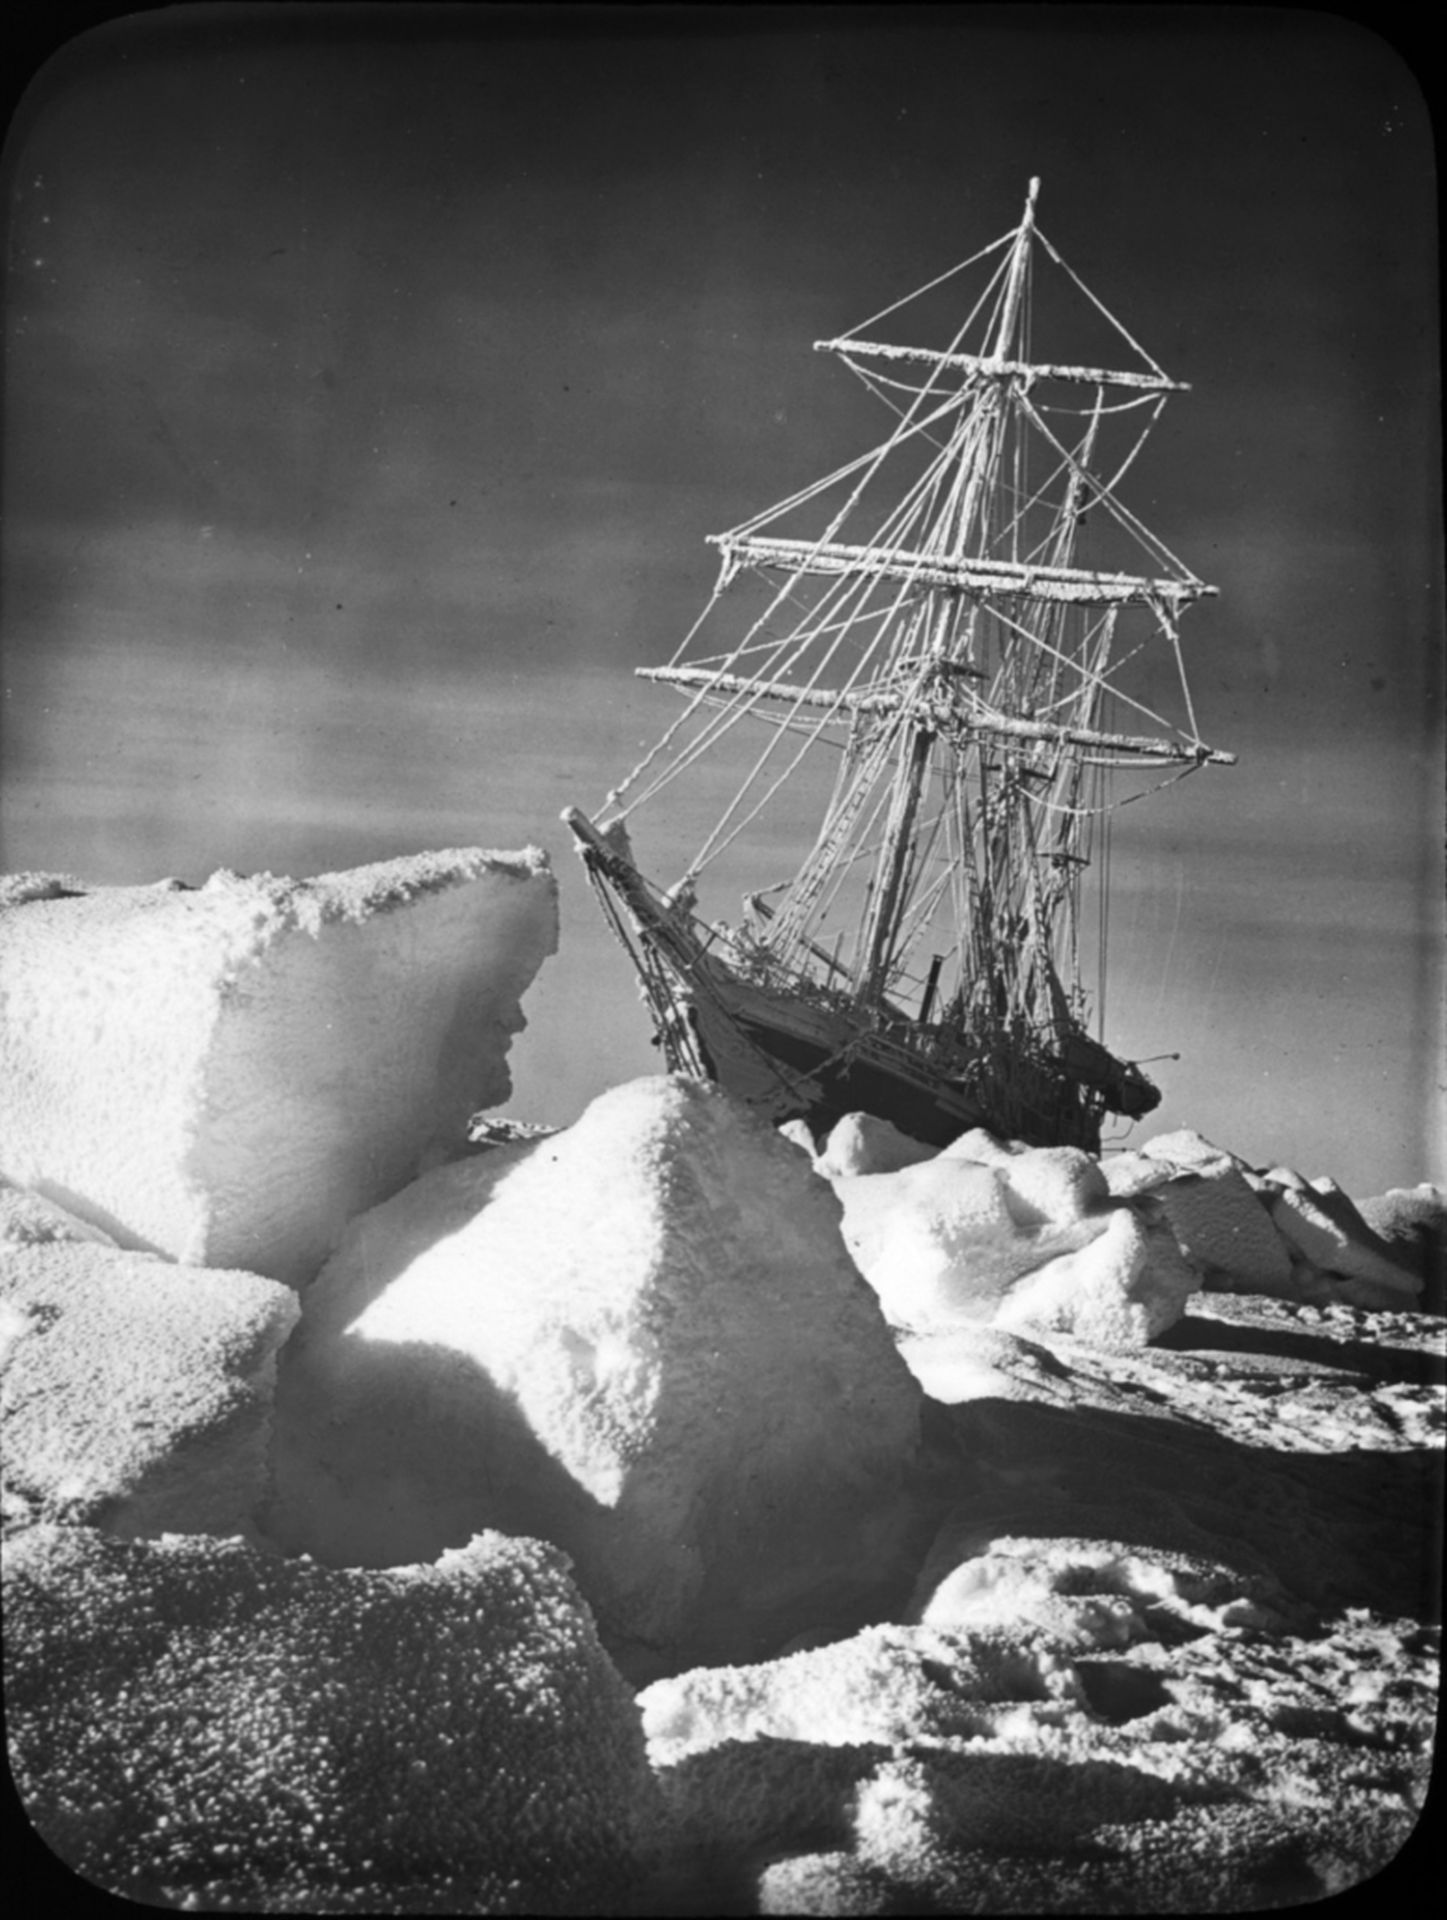 Shackleton's ship, the Endurance trapped in ice in the Weddell Sea.